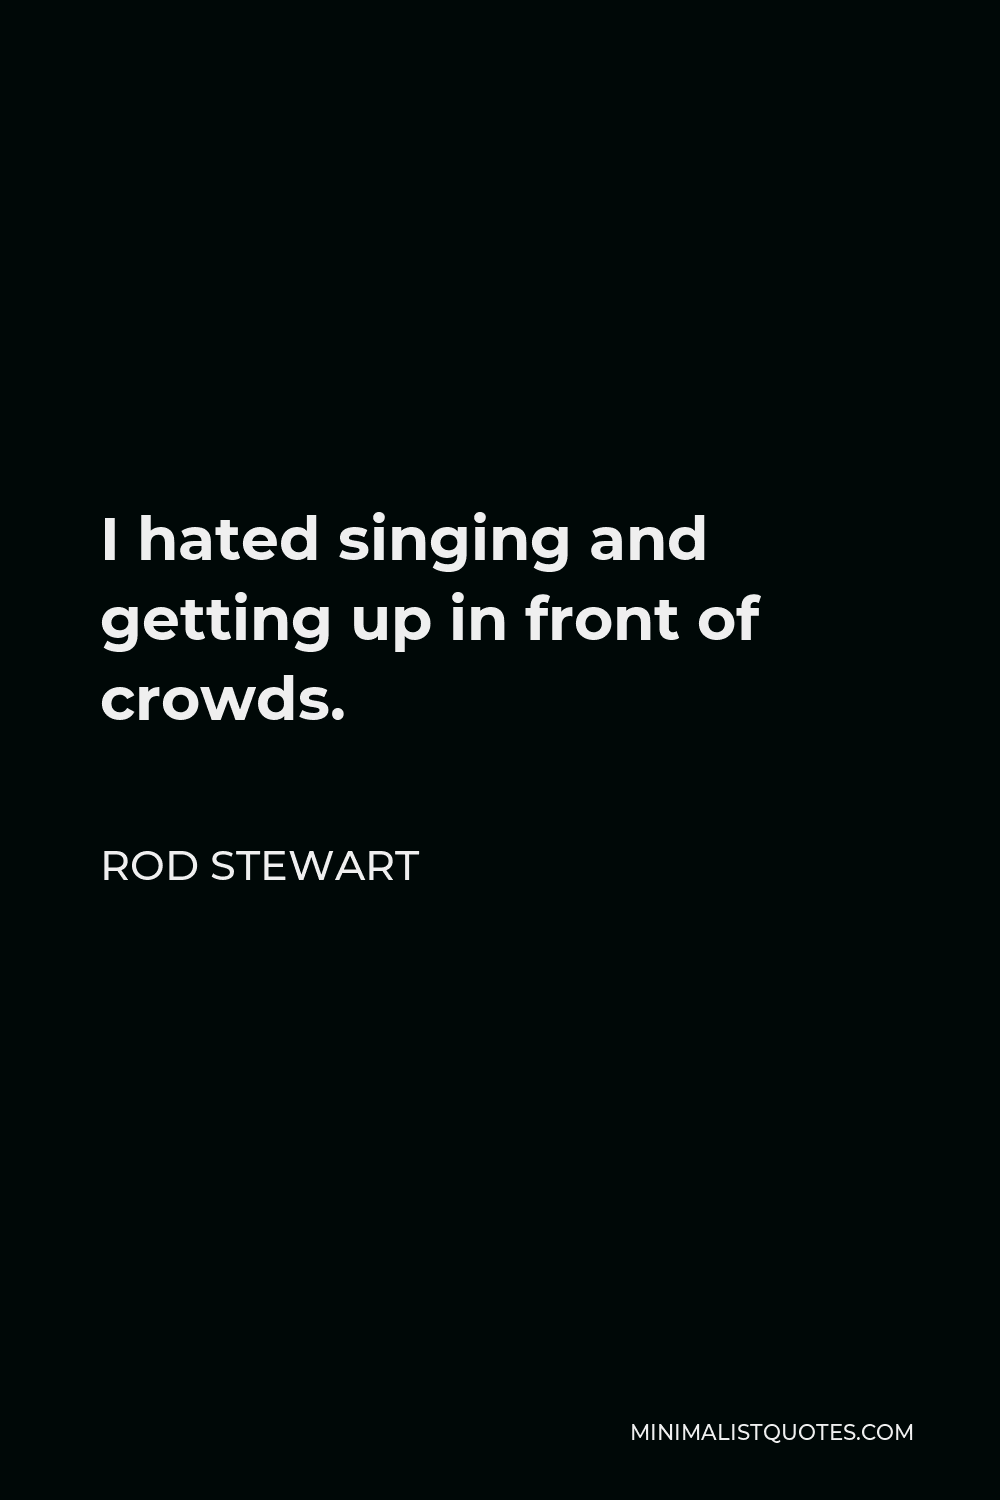 Rod Stewart Quote - I hated singing and getting up in front of crowds.